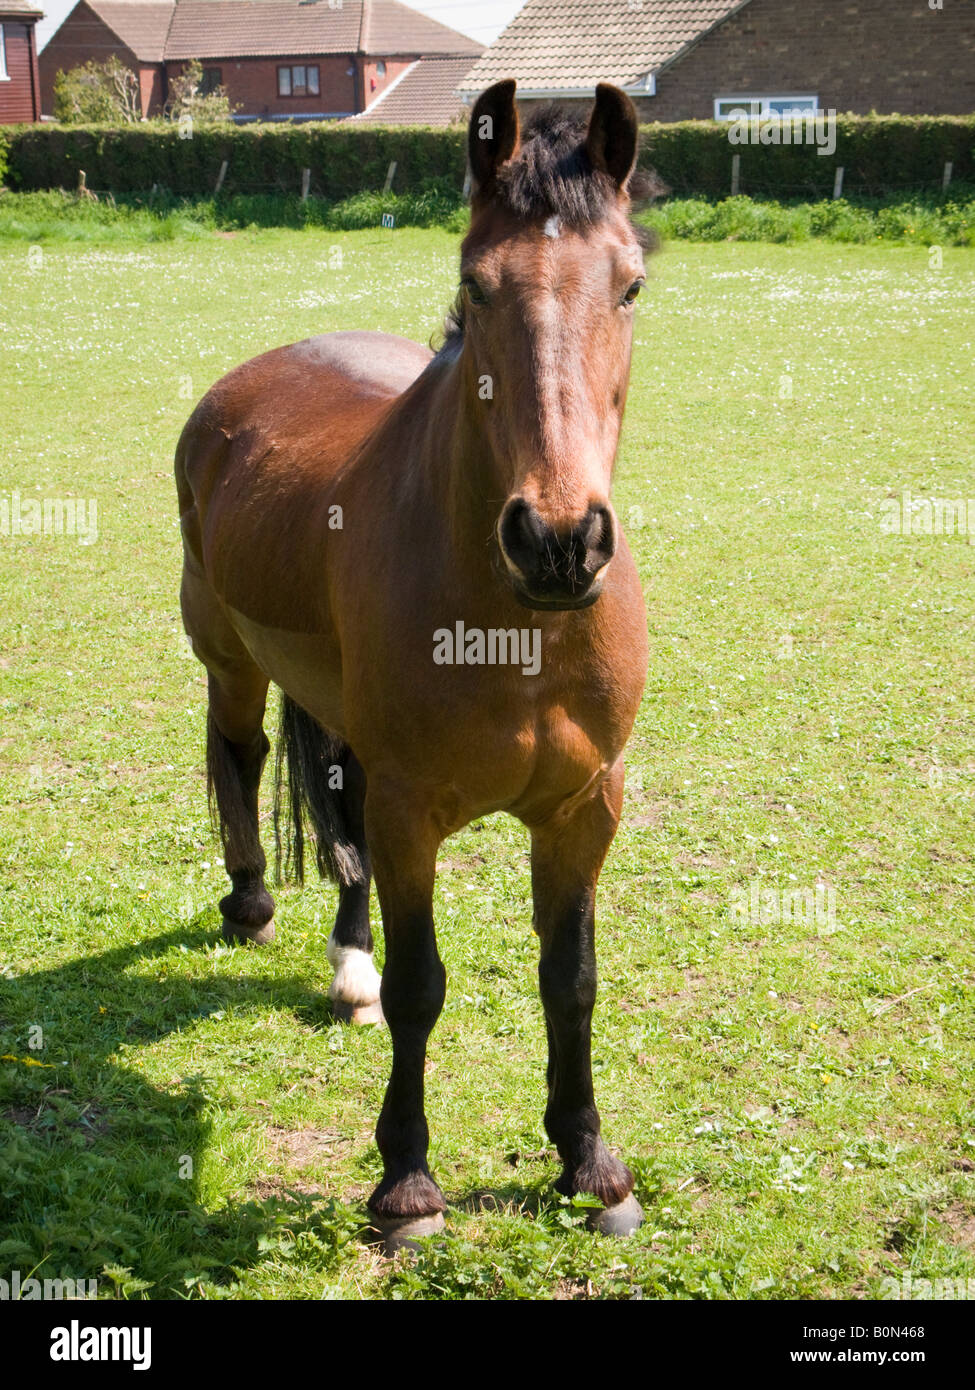 Chestnut brown horse in an urban field looking at camera Stock Photo